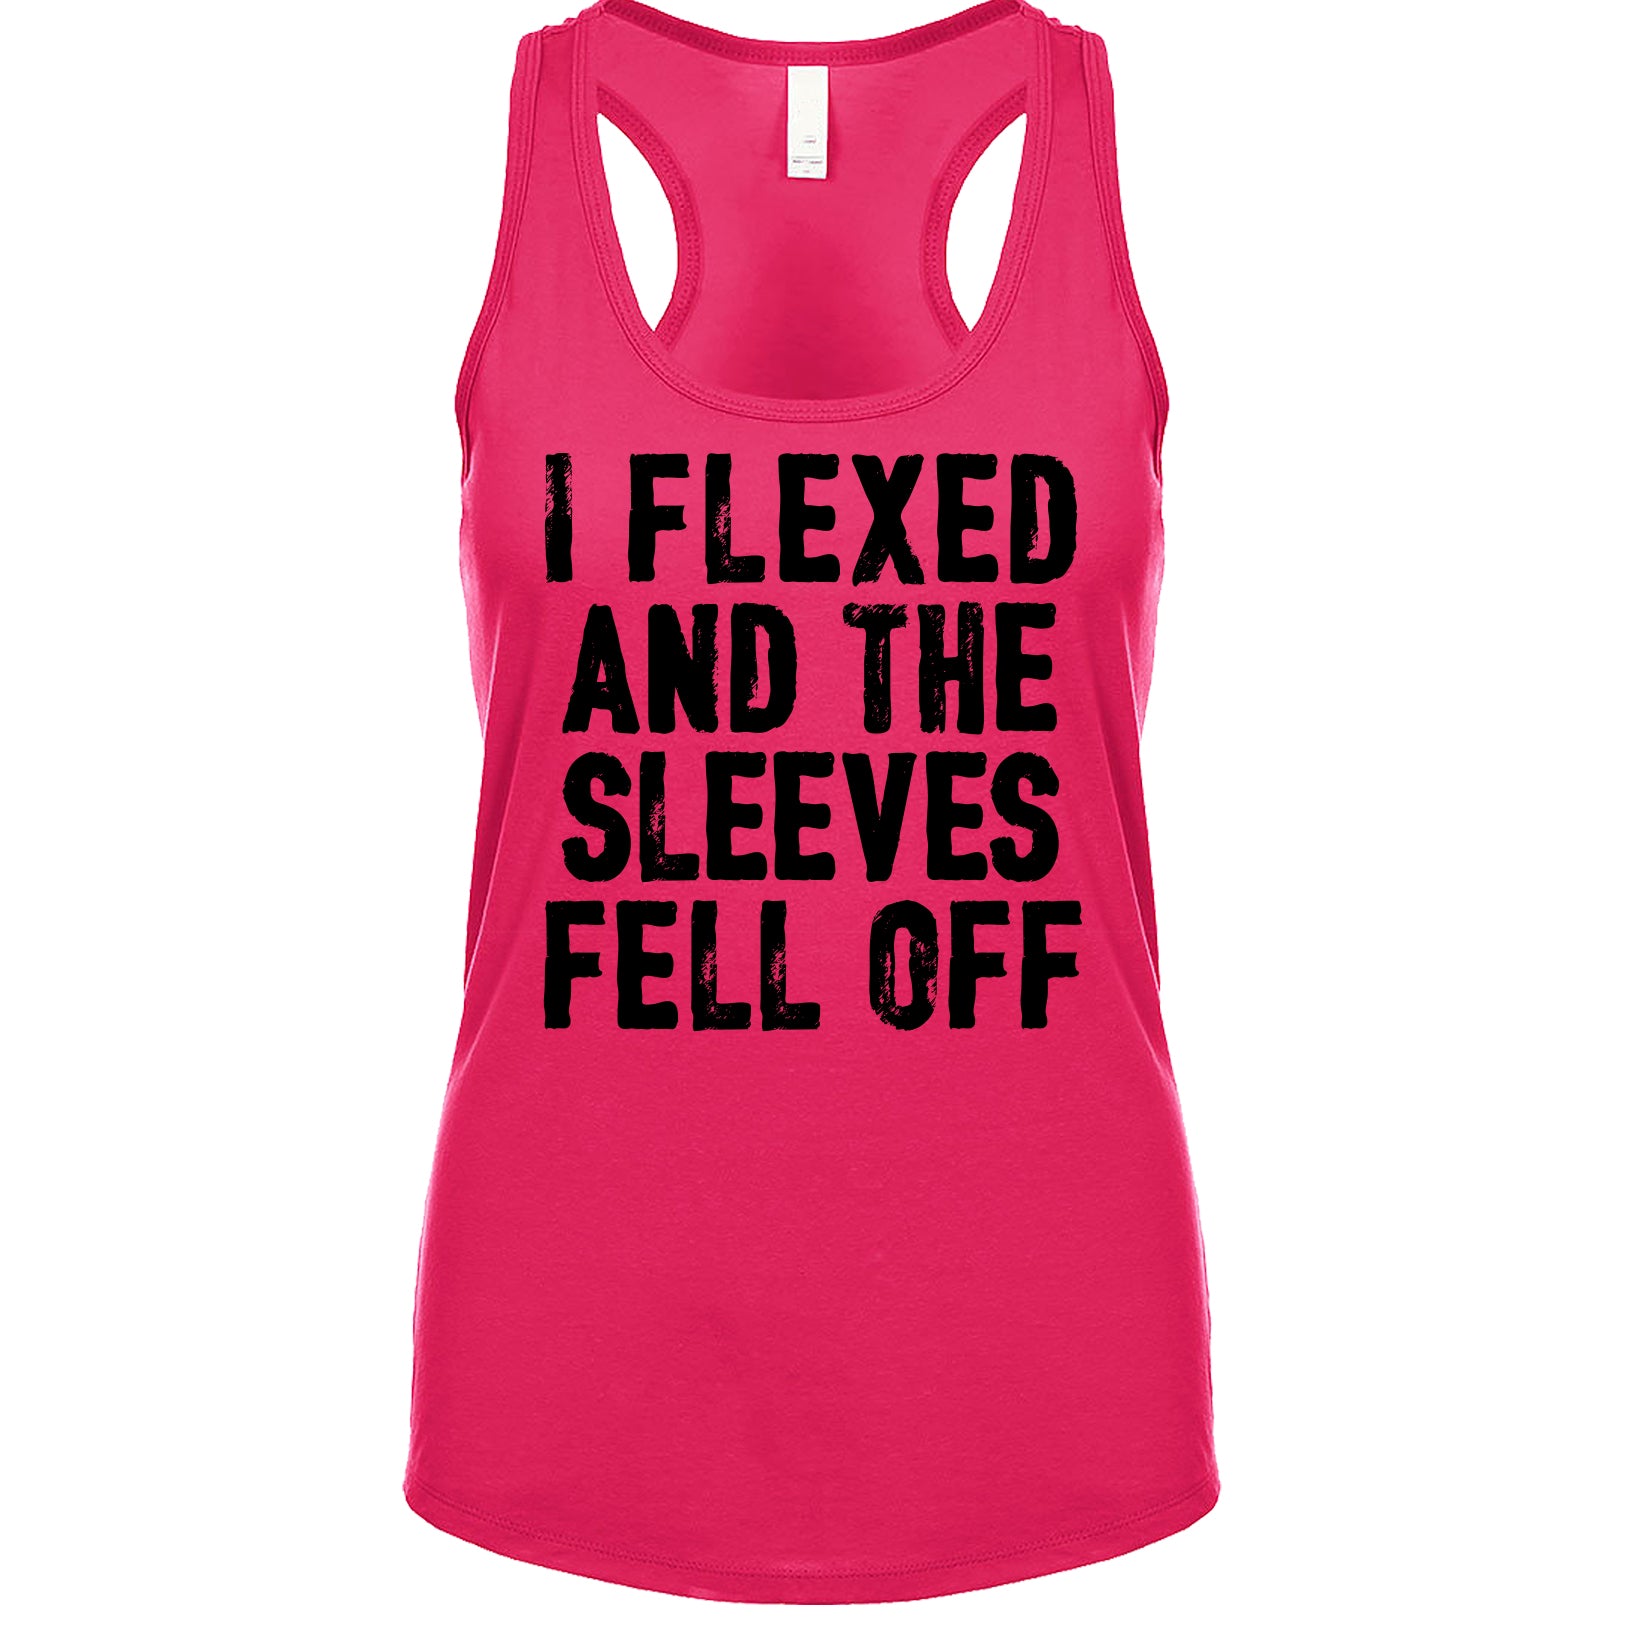 I Flexed And The Sleeves Fell Off Women's Tank